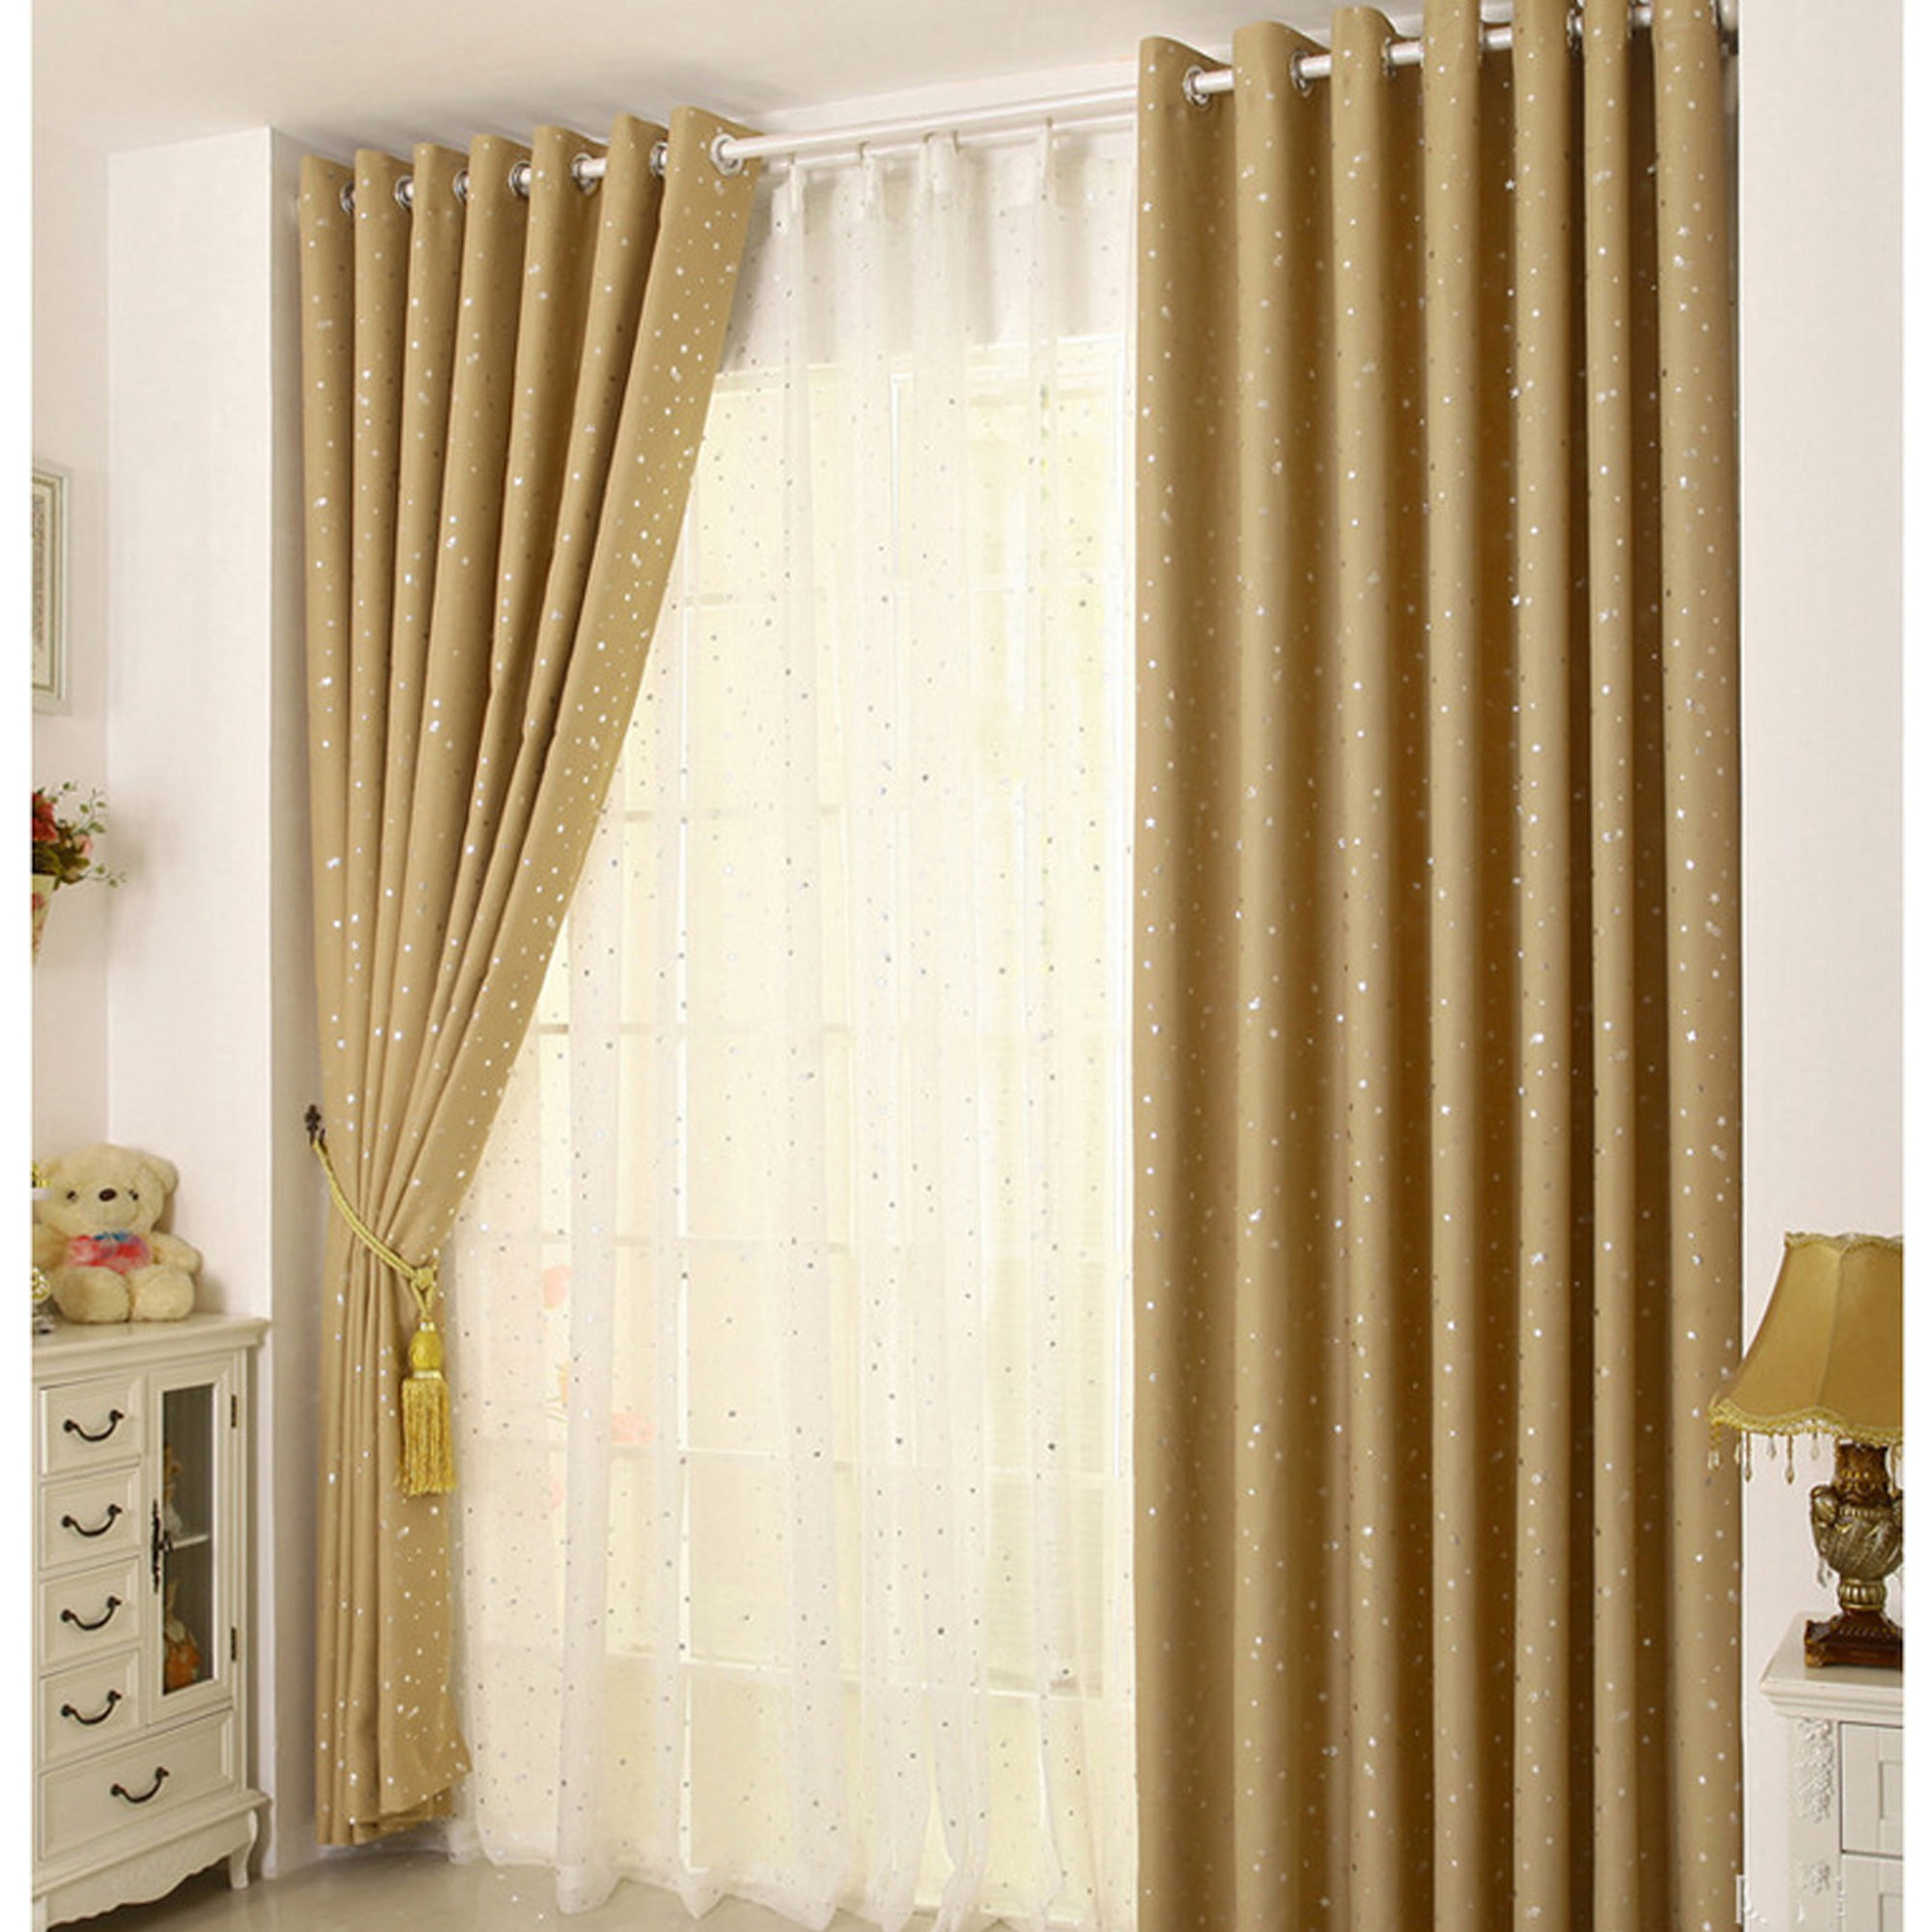 LELINTA Blackout Curtains, Curtains for Bedroom Room